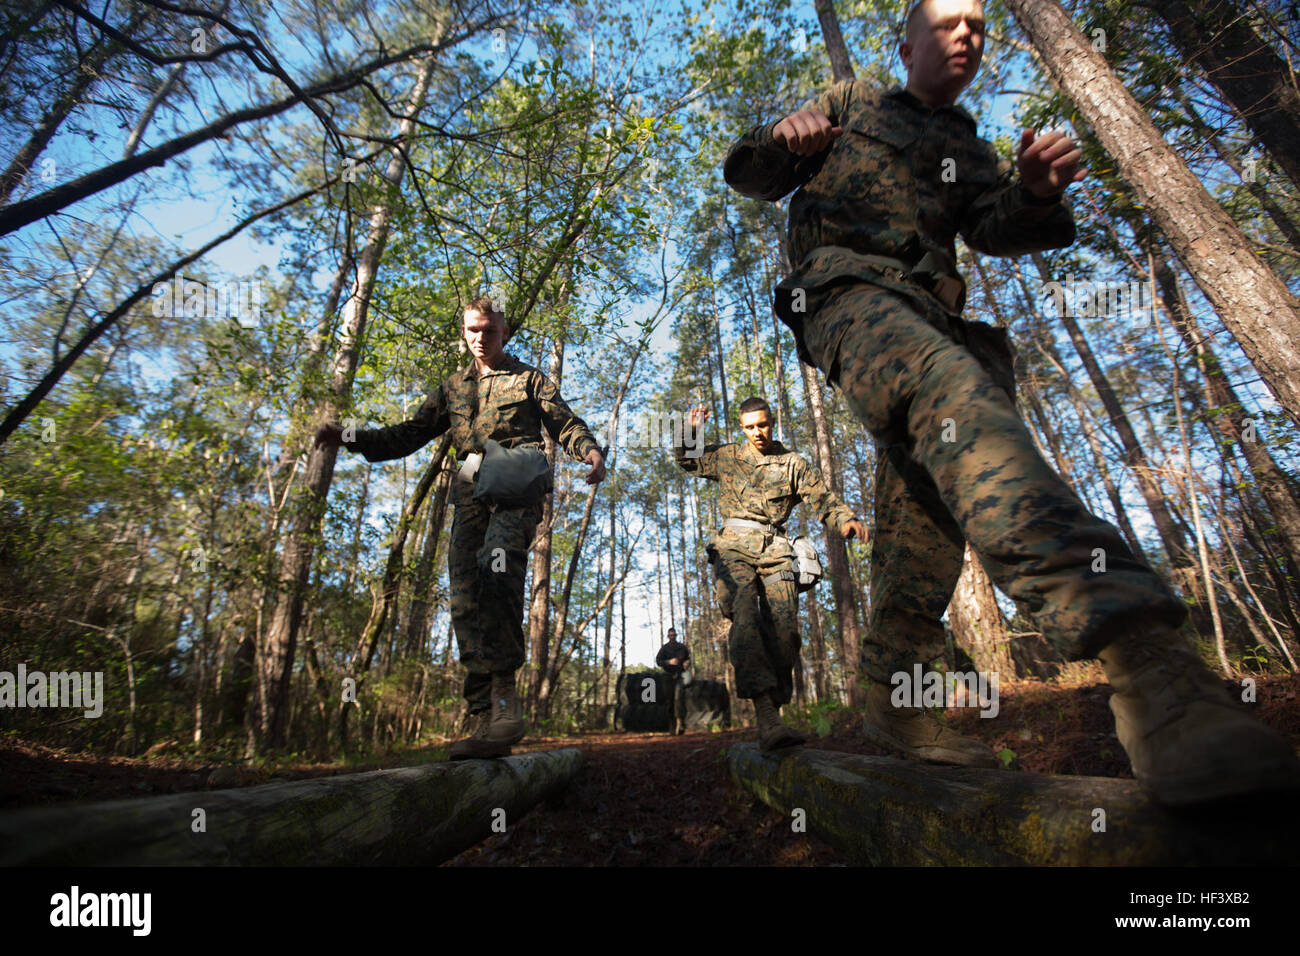 Marines with the 24th Marine Expeditionary Unit run through an obstacle course as part of their chemical, biological, radiological, and nuclear training at Camp Lejeune, N.C., April 13, 2016. The training provides Marines with a basic knowledge of how to don and clear a gas mask to effectively defend against chemical or biological assaults. (U.S. Marine Corps photo by Cpl. Todd F. Michalek) 24th MEU conducts CBRN training 160413-M-YH418-001 Stock Photo